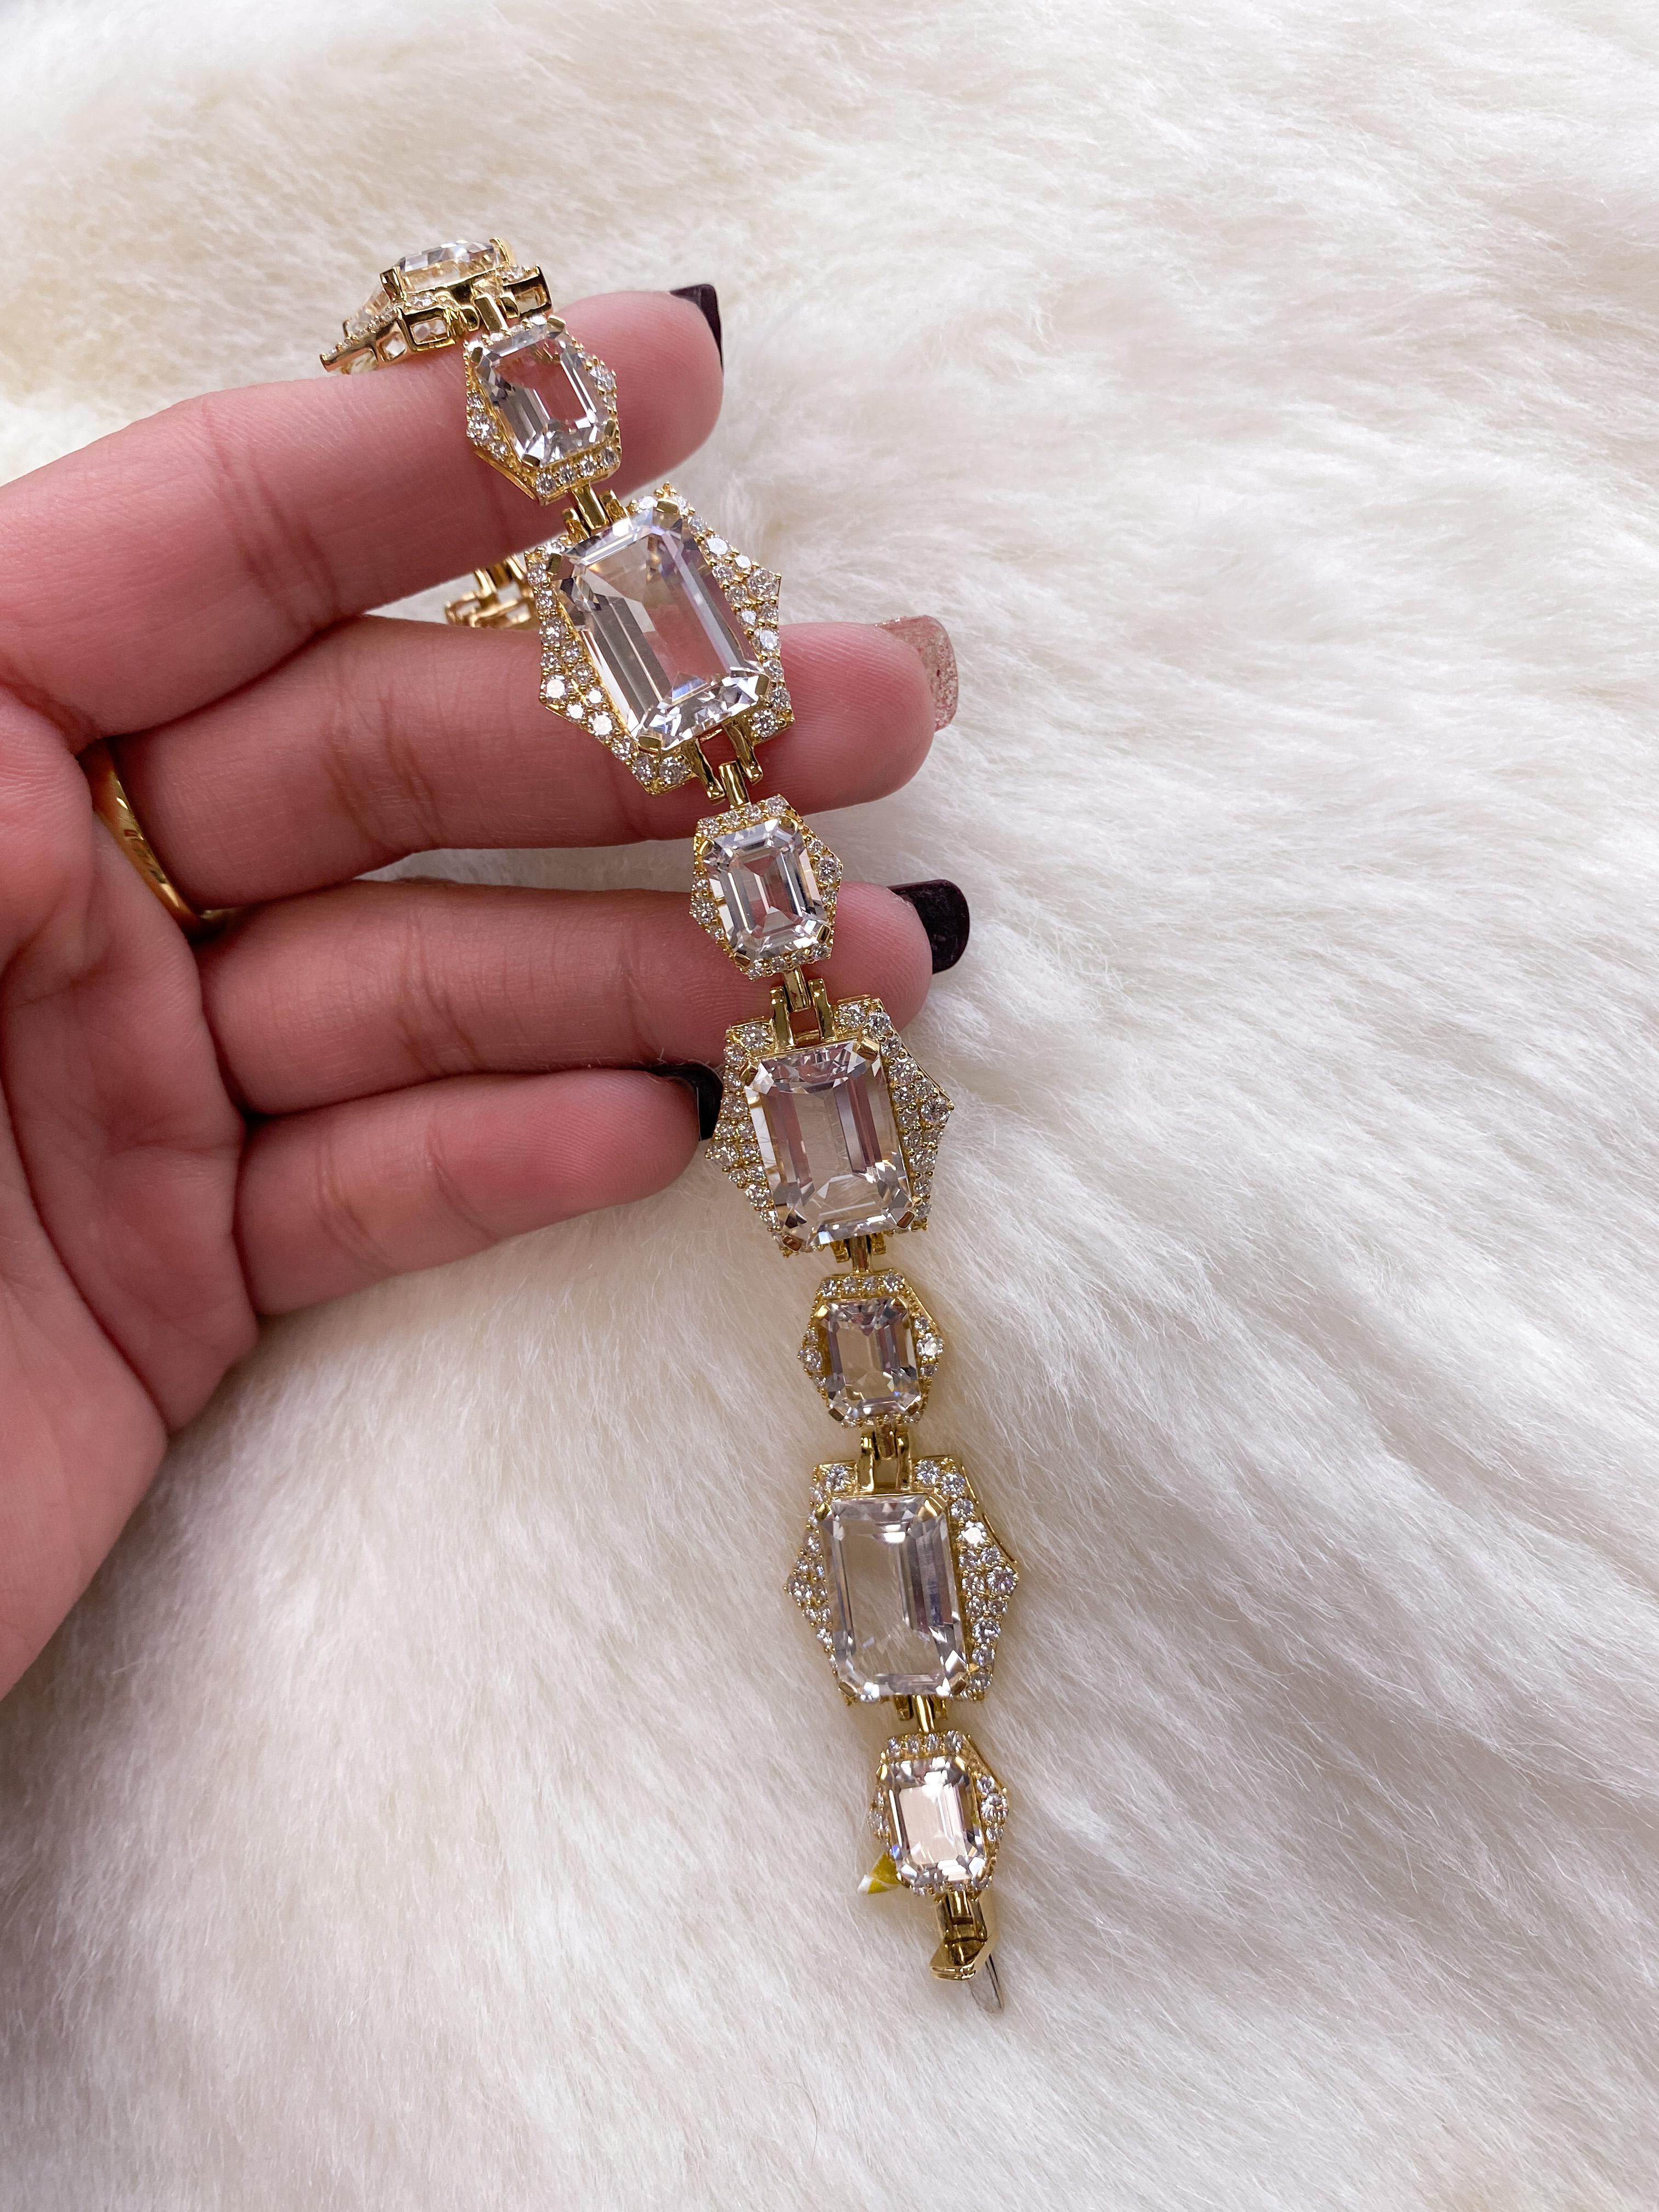 Emerald Cut Rock Crystal Bracelet with Diamonds in 18K Yellow Gold, from 'Rain-Forest' Collection

Stone size: 15 x 10 & 9 x 7 mm

Approx. gemstone Wt: 44.67 Carats (Rock Crystal)

Diamonds: G/H / VS, Approx. Wt: 4.52 Carats